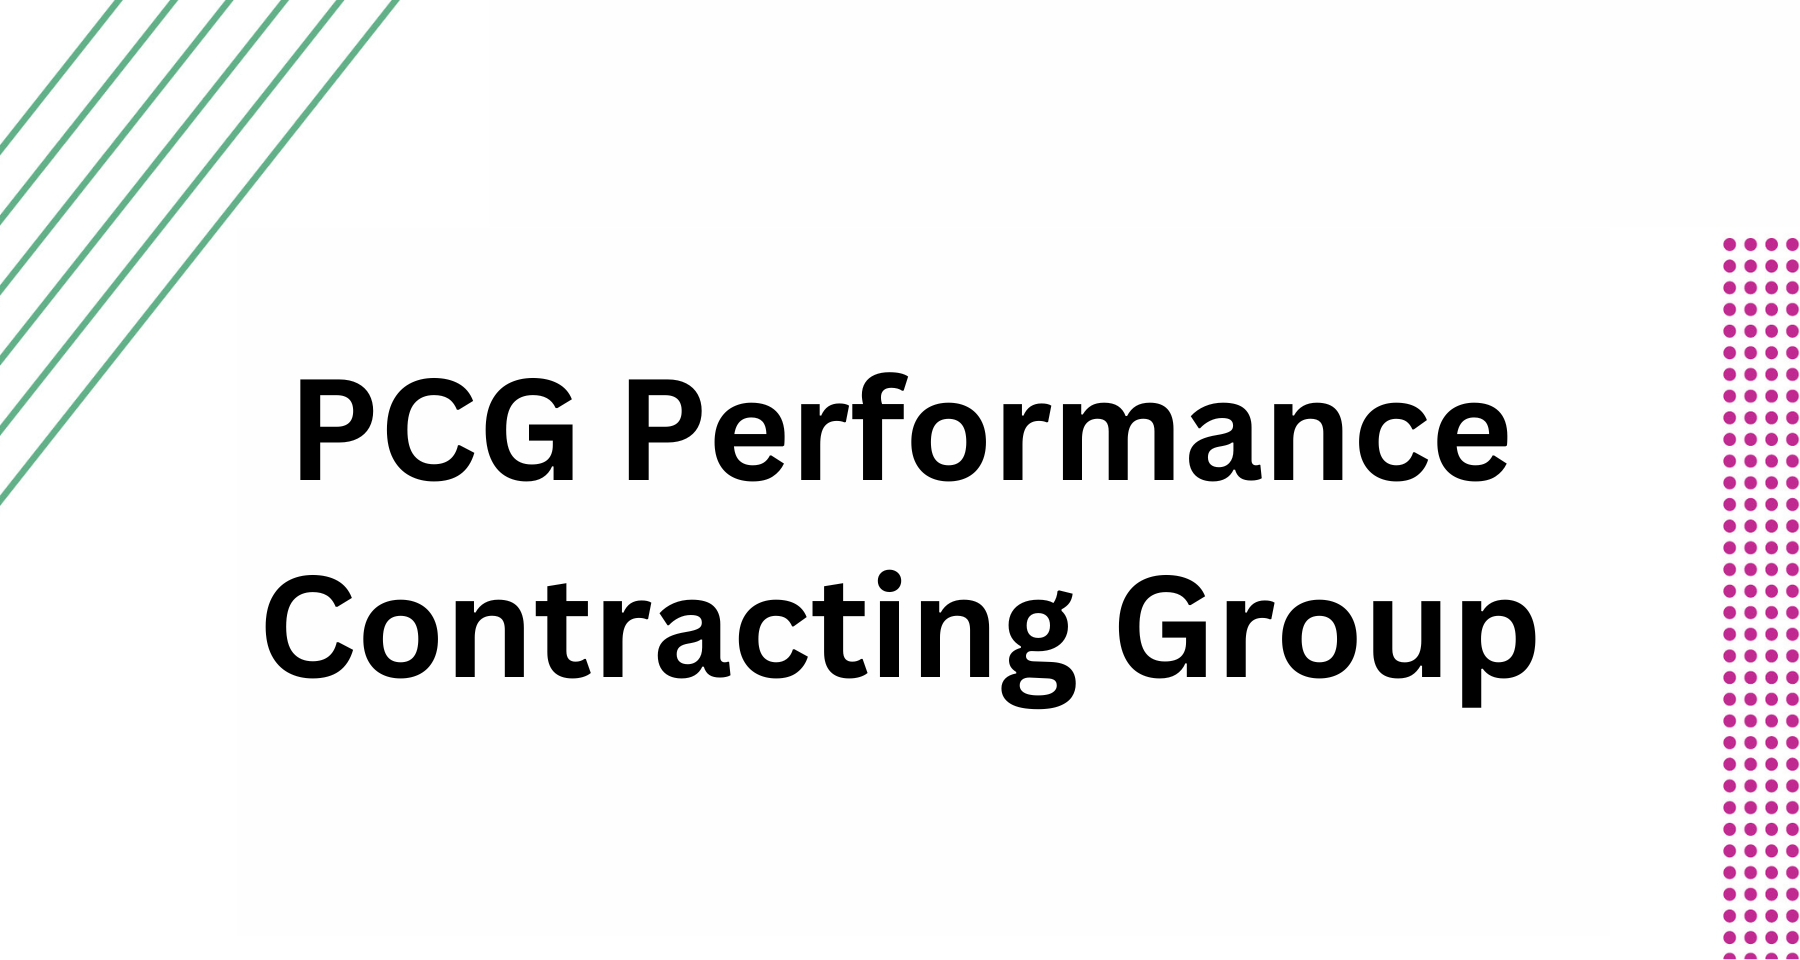 PCG Performance Contracting Group